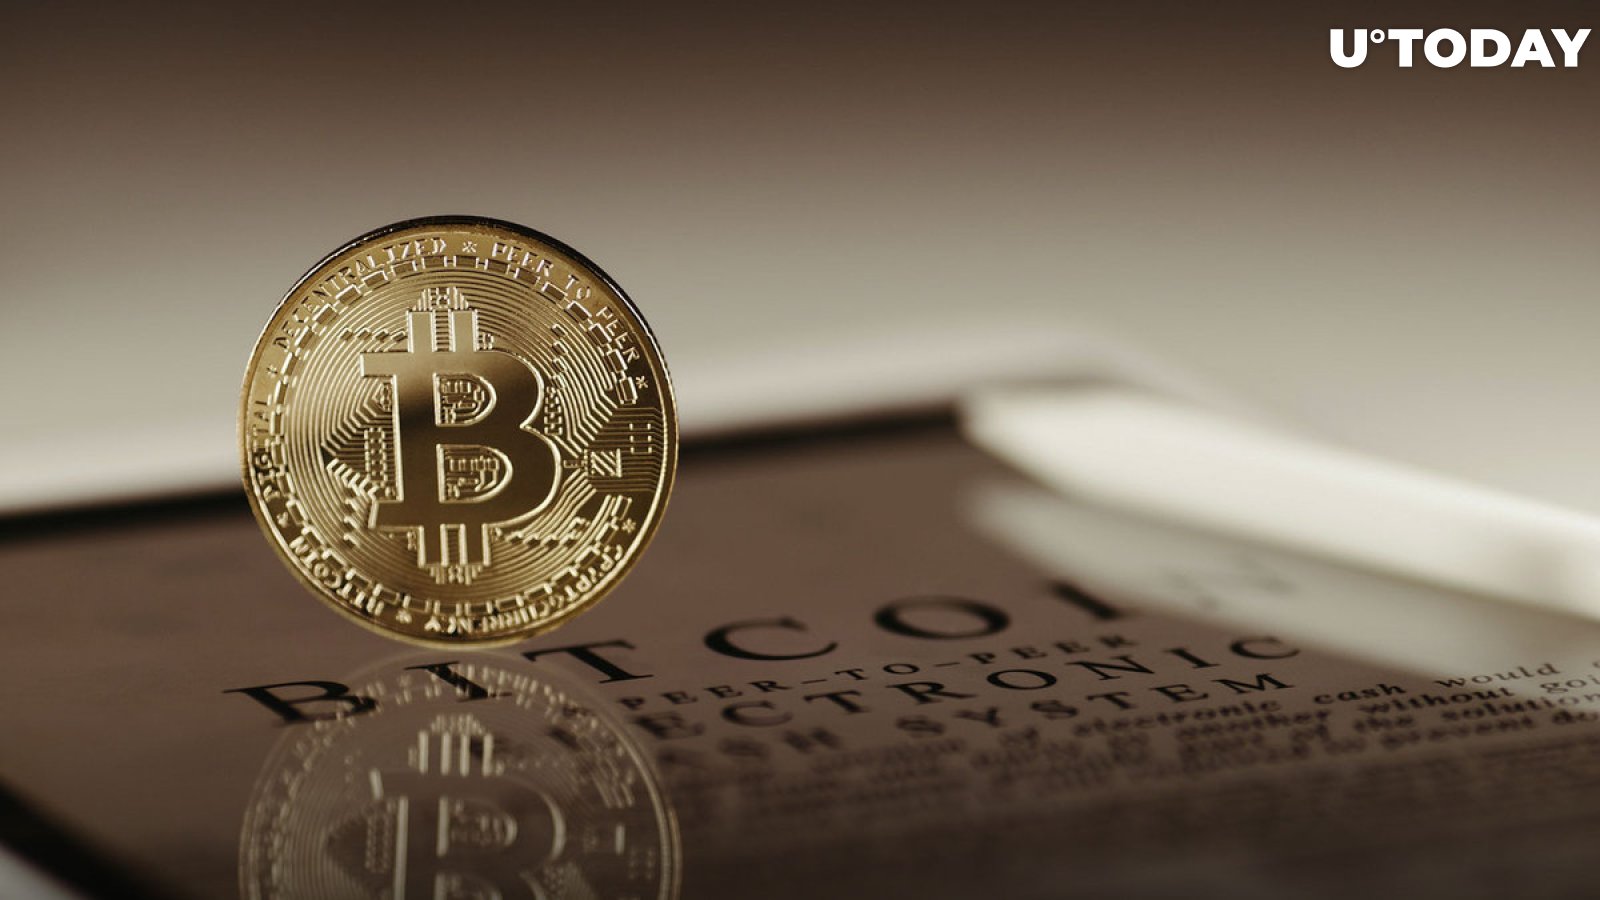 Author of Bitcoin Globally Bestselling Book Rejects $1 Million per BTC Forecast, Here's Why